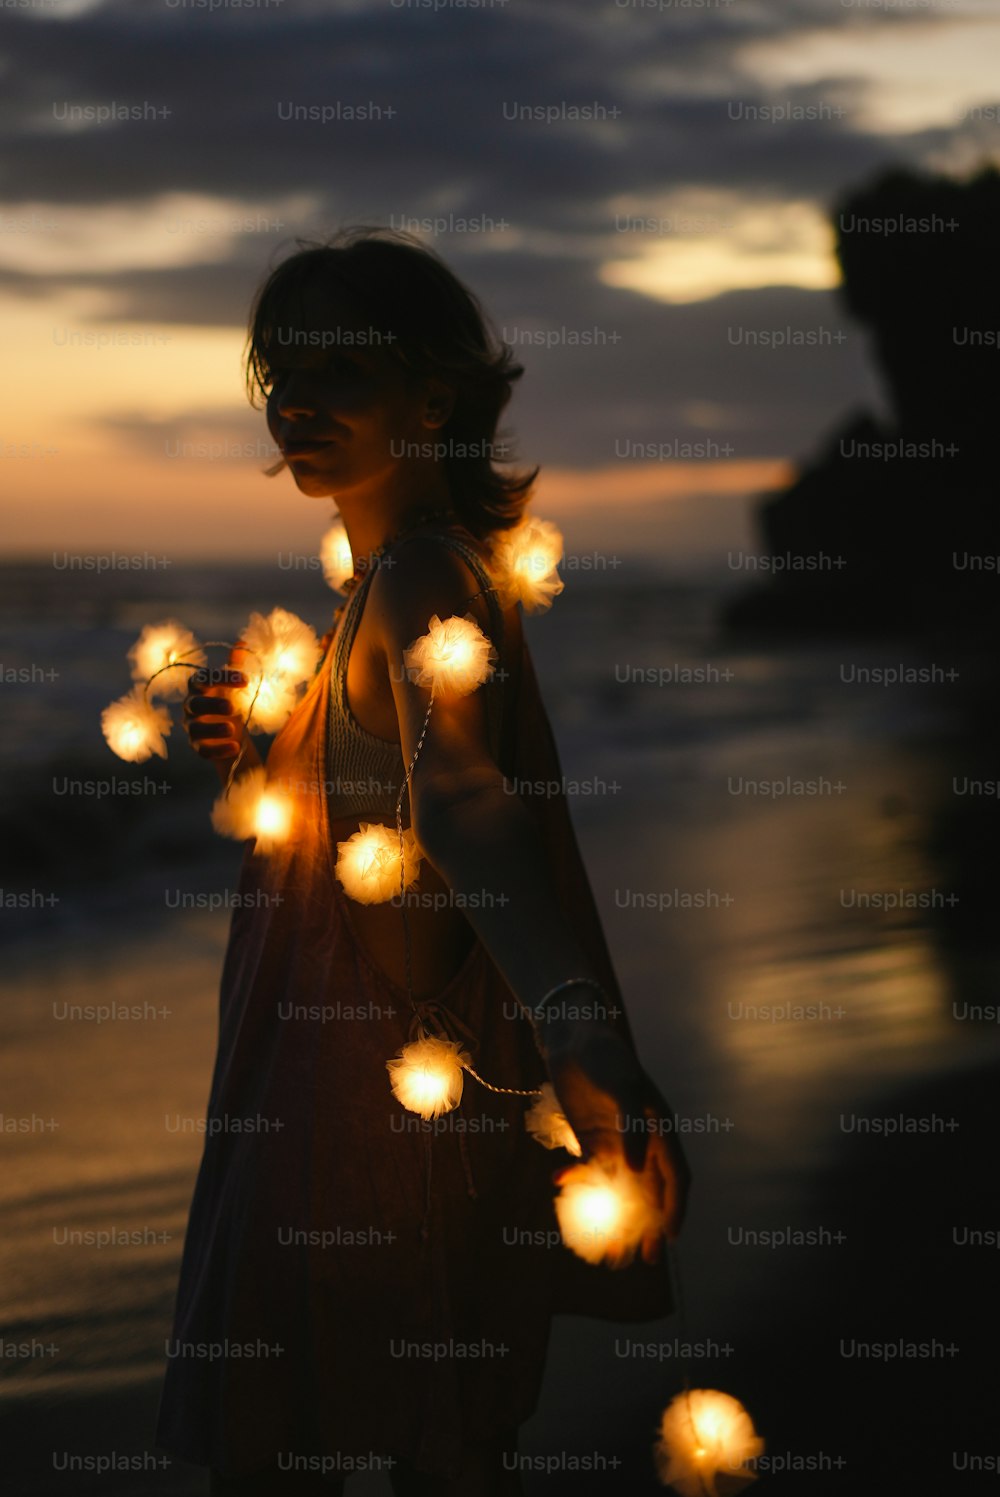 a woman standing on a beach holding a string of lights